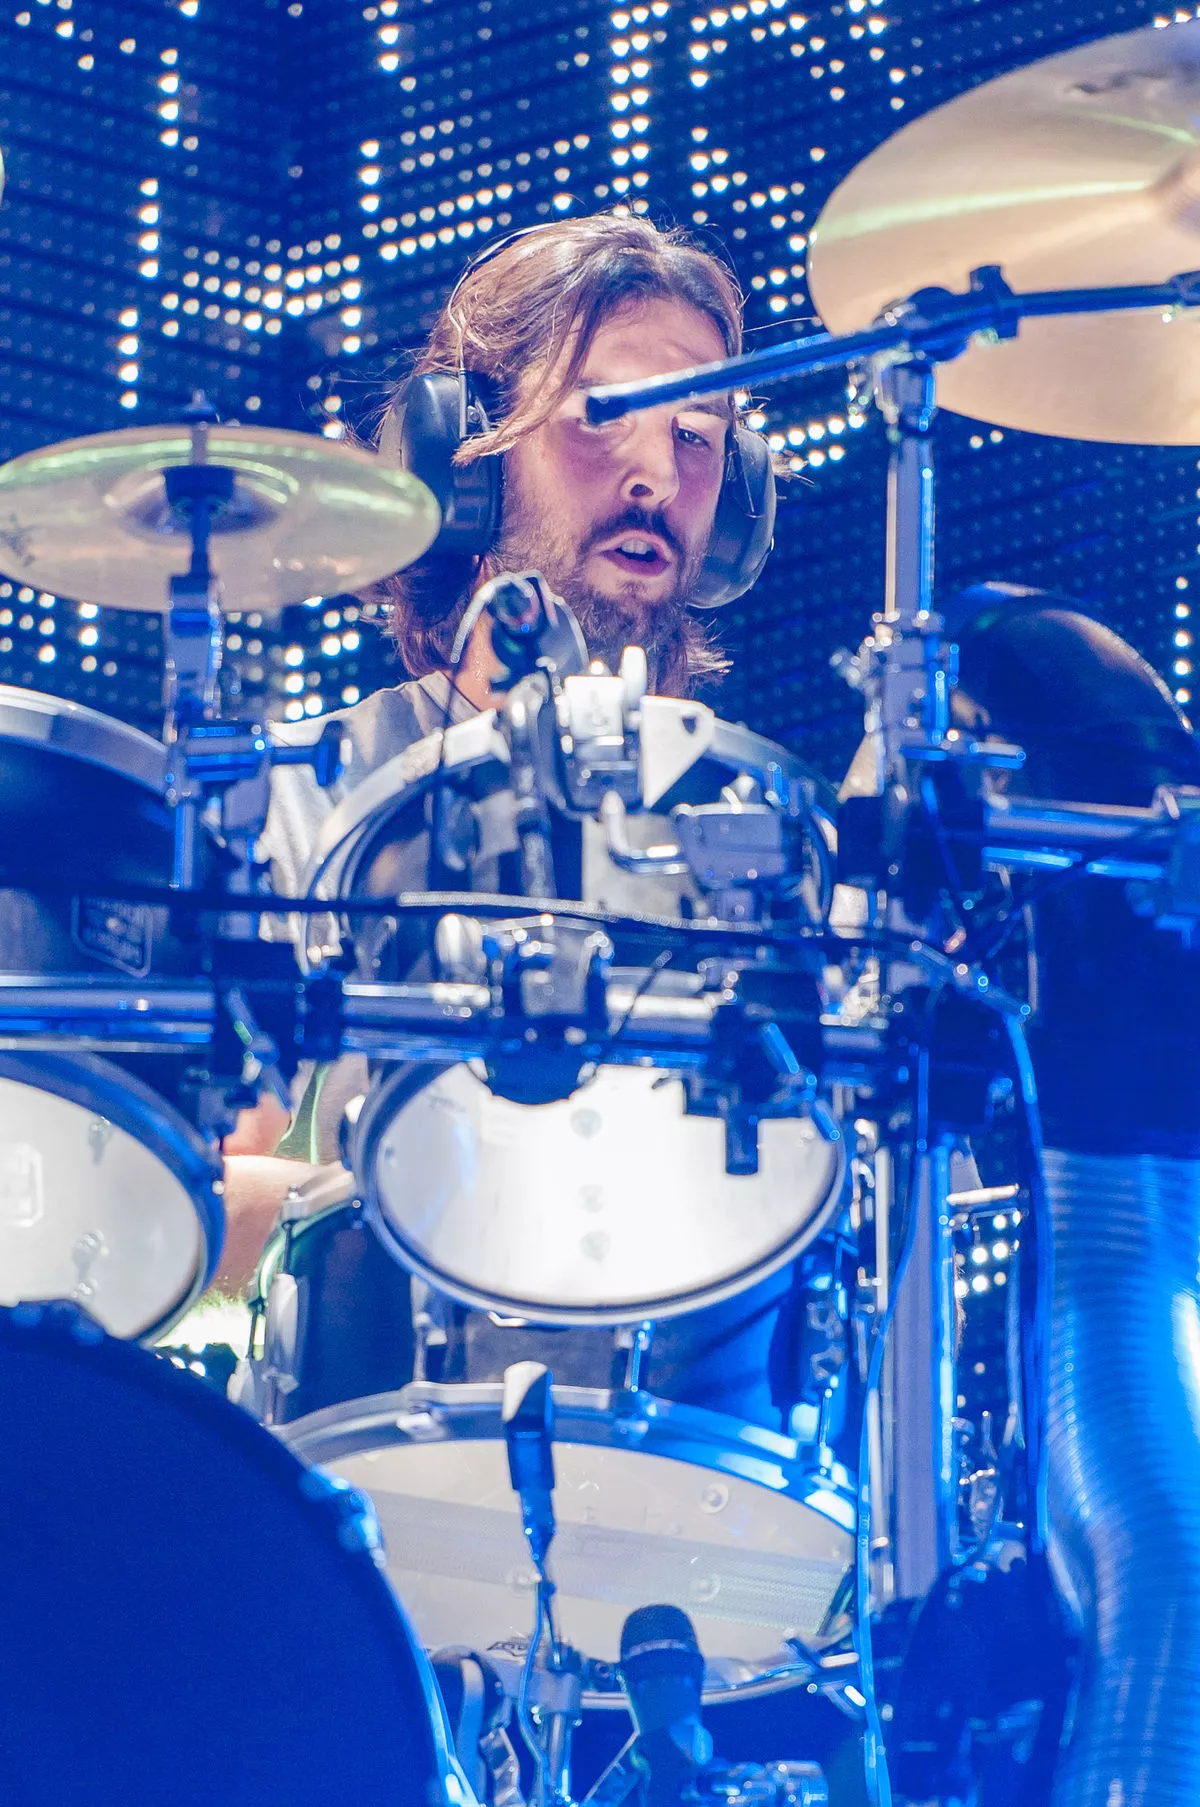 12 Facts About Rob Bourdon | FactSnippet